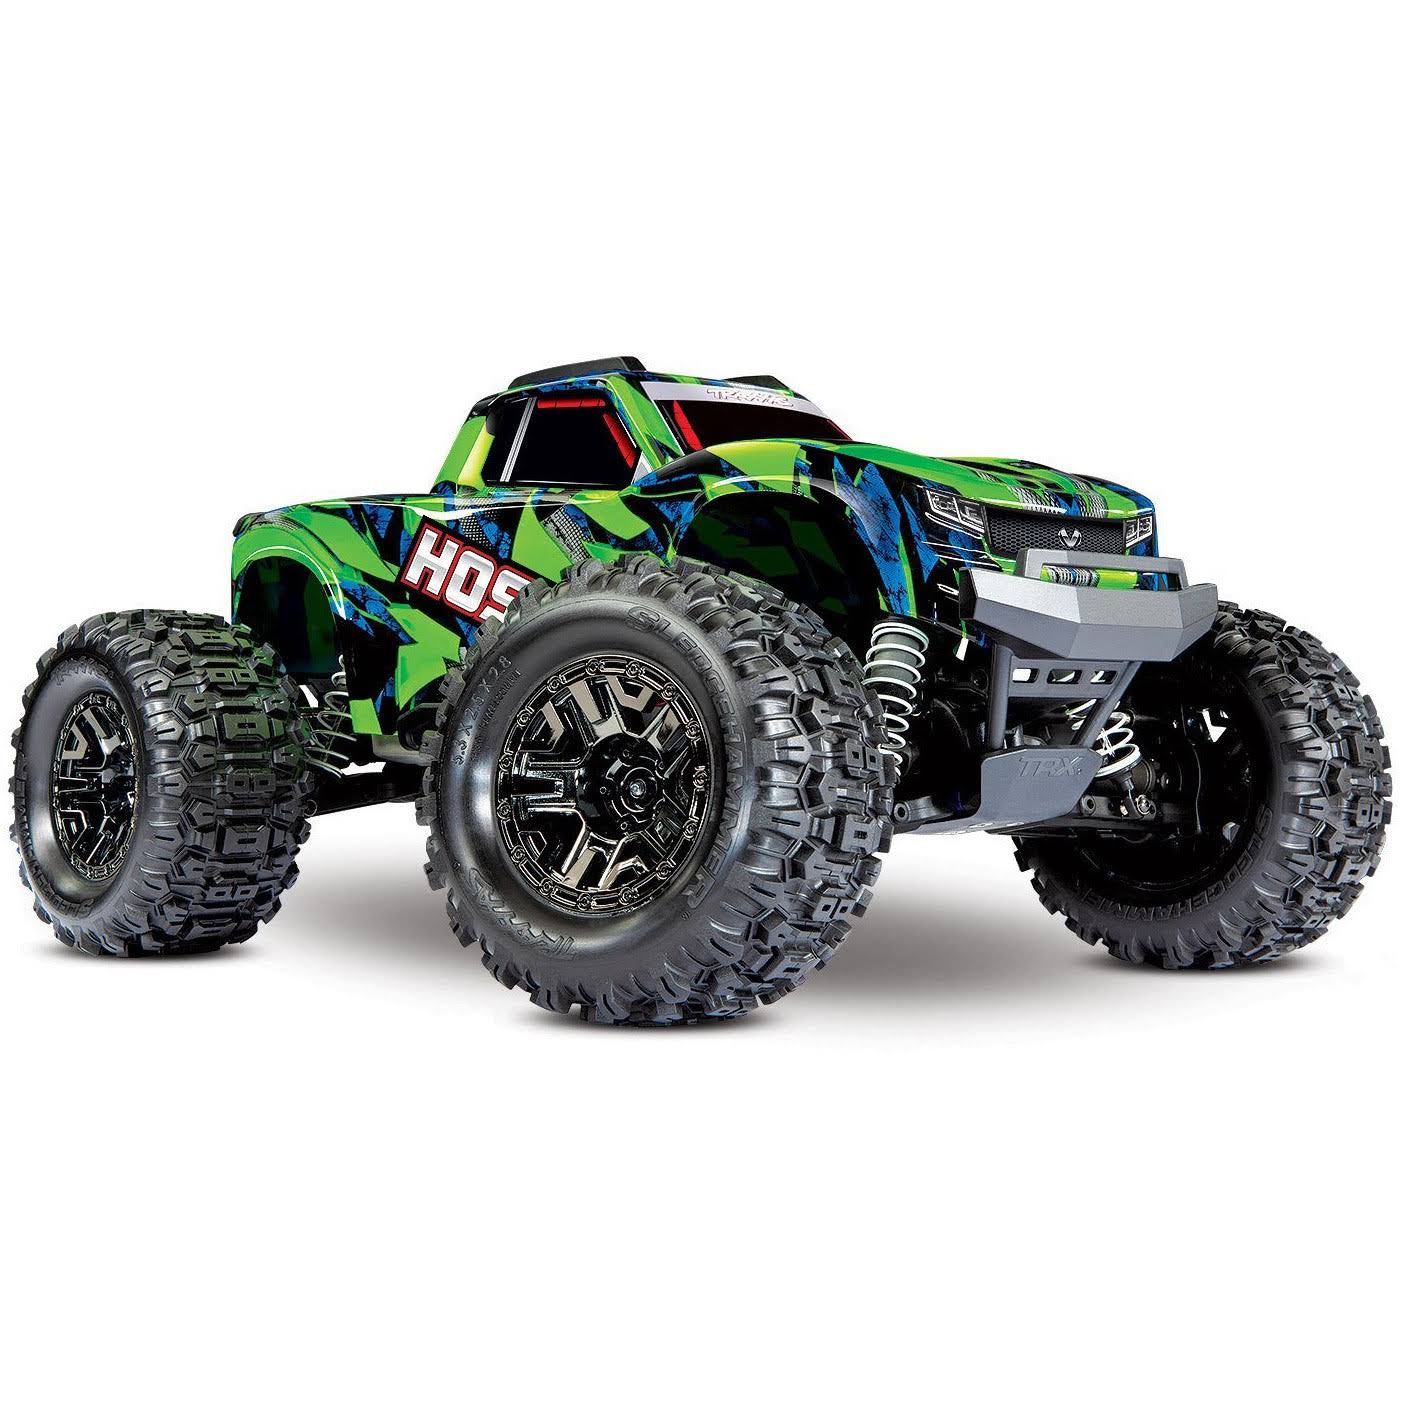 Traxxas Hoss 4X4 VXL 1/10 Scale 4WD Brushless Electric Monster Truck Green